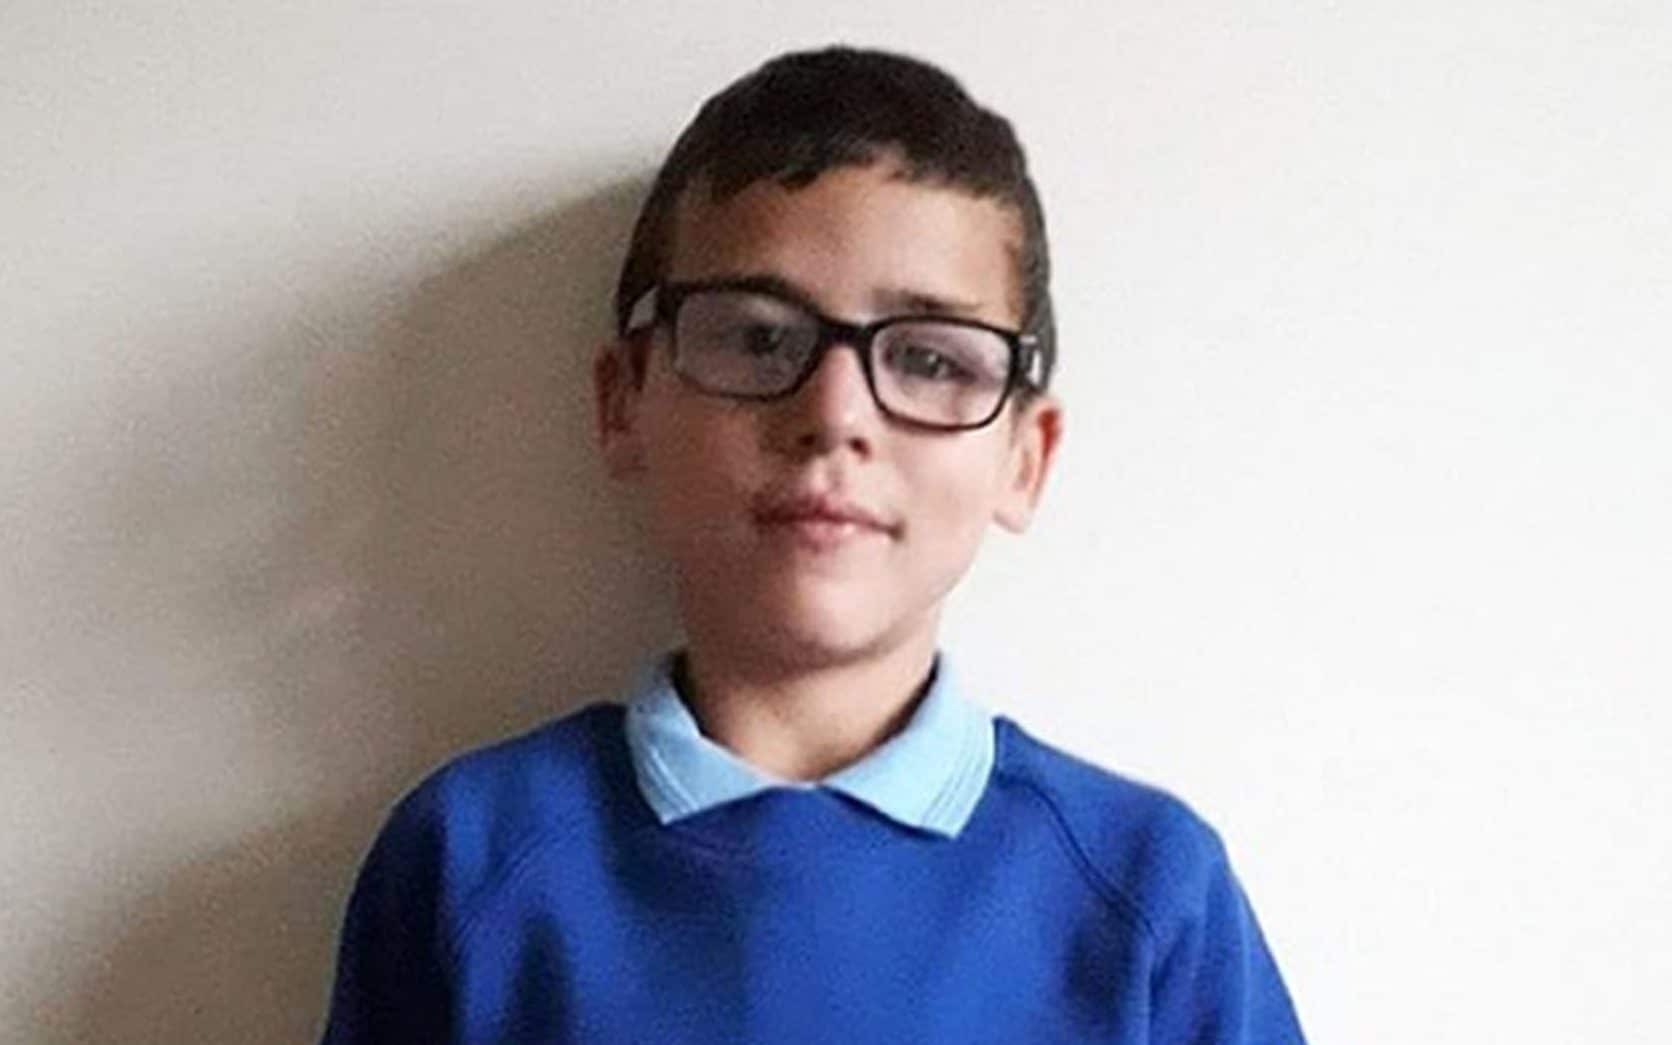 Boy, nine, killed by mother and partner in lockdown suffered ‘unimaginable fear and distress’